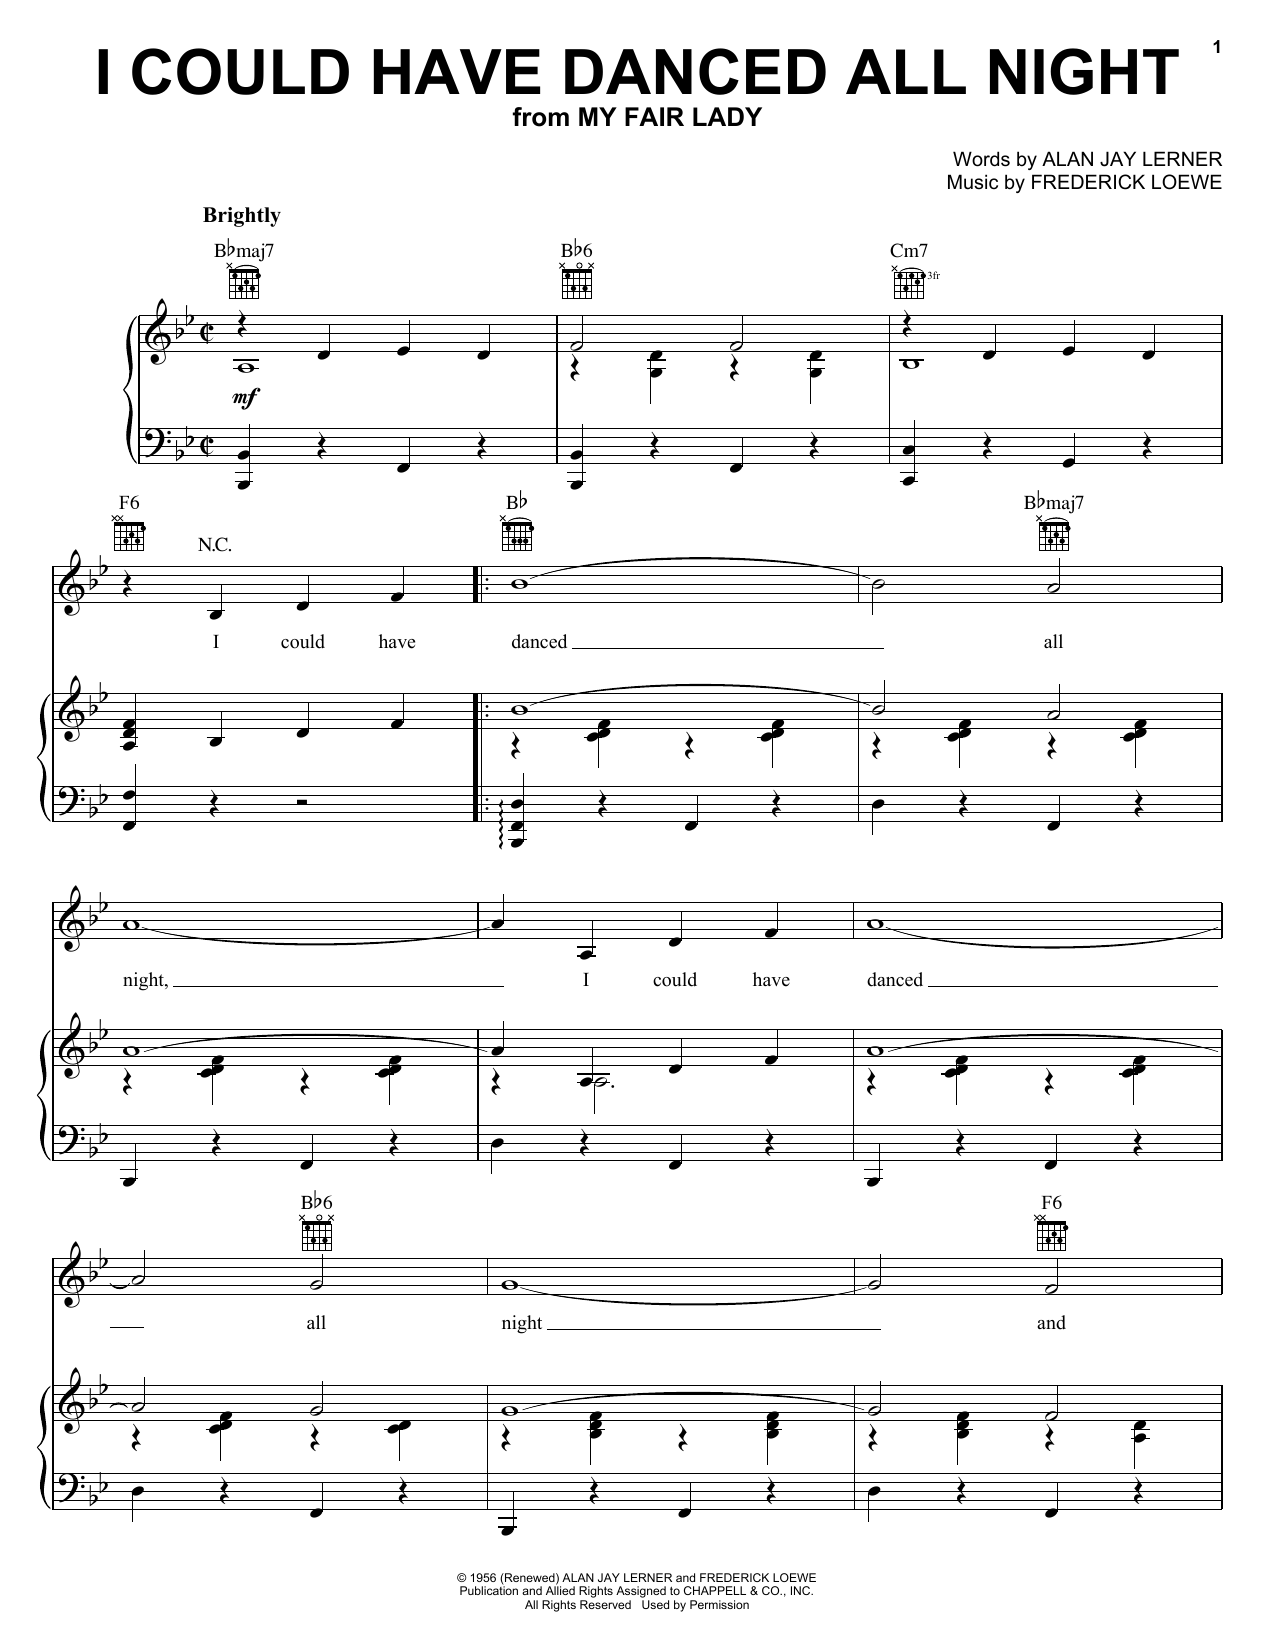 Lerner & Loewe I Could Have Danced All Night sheet music notes printable PDF score